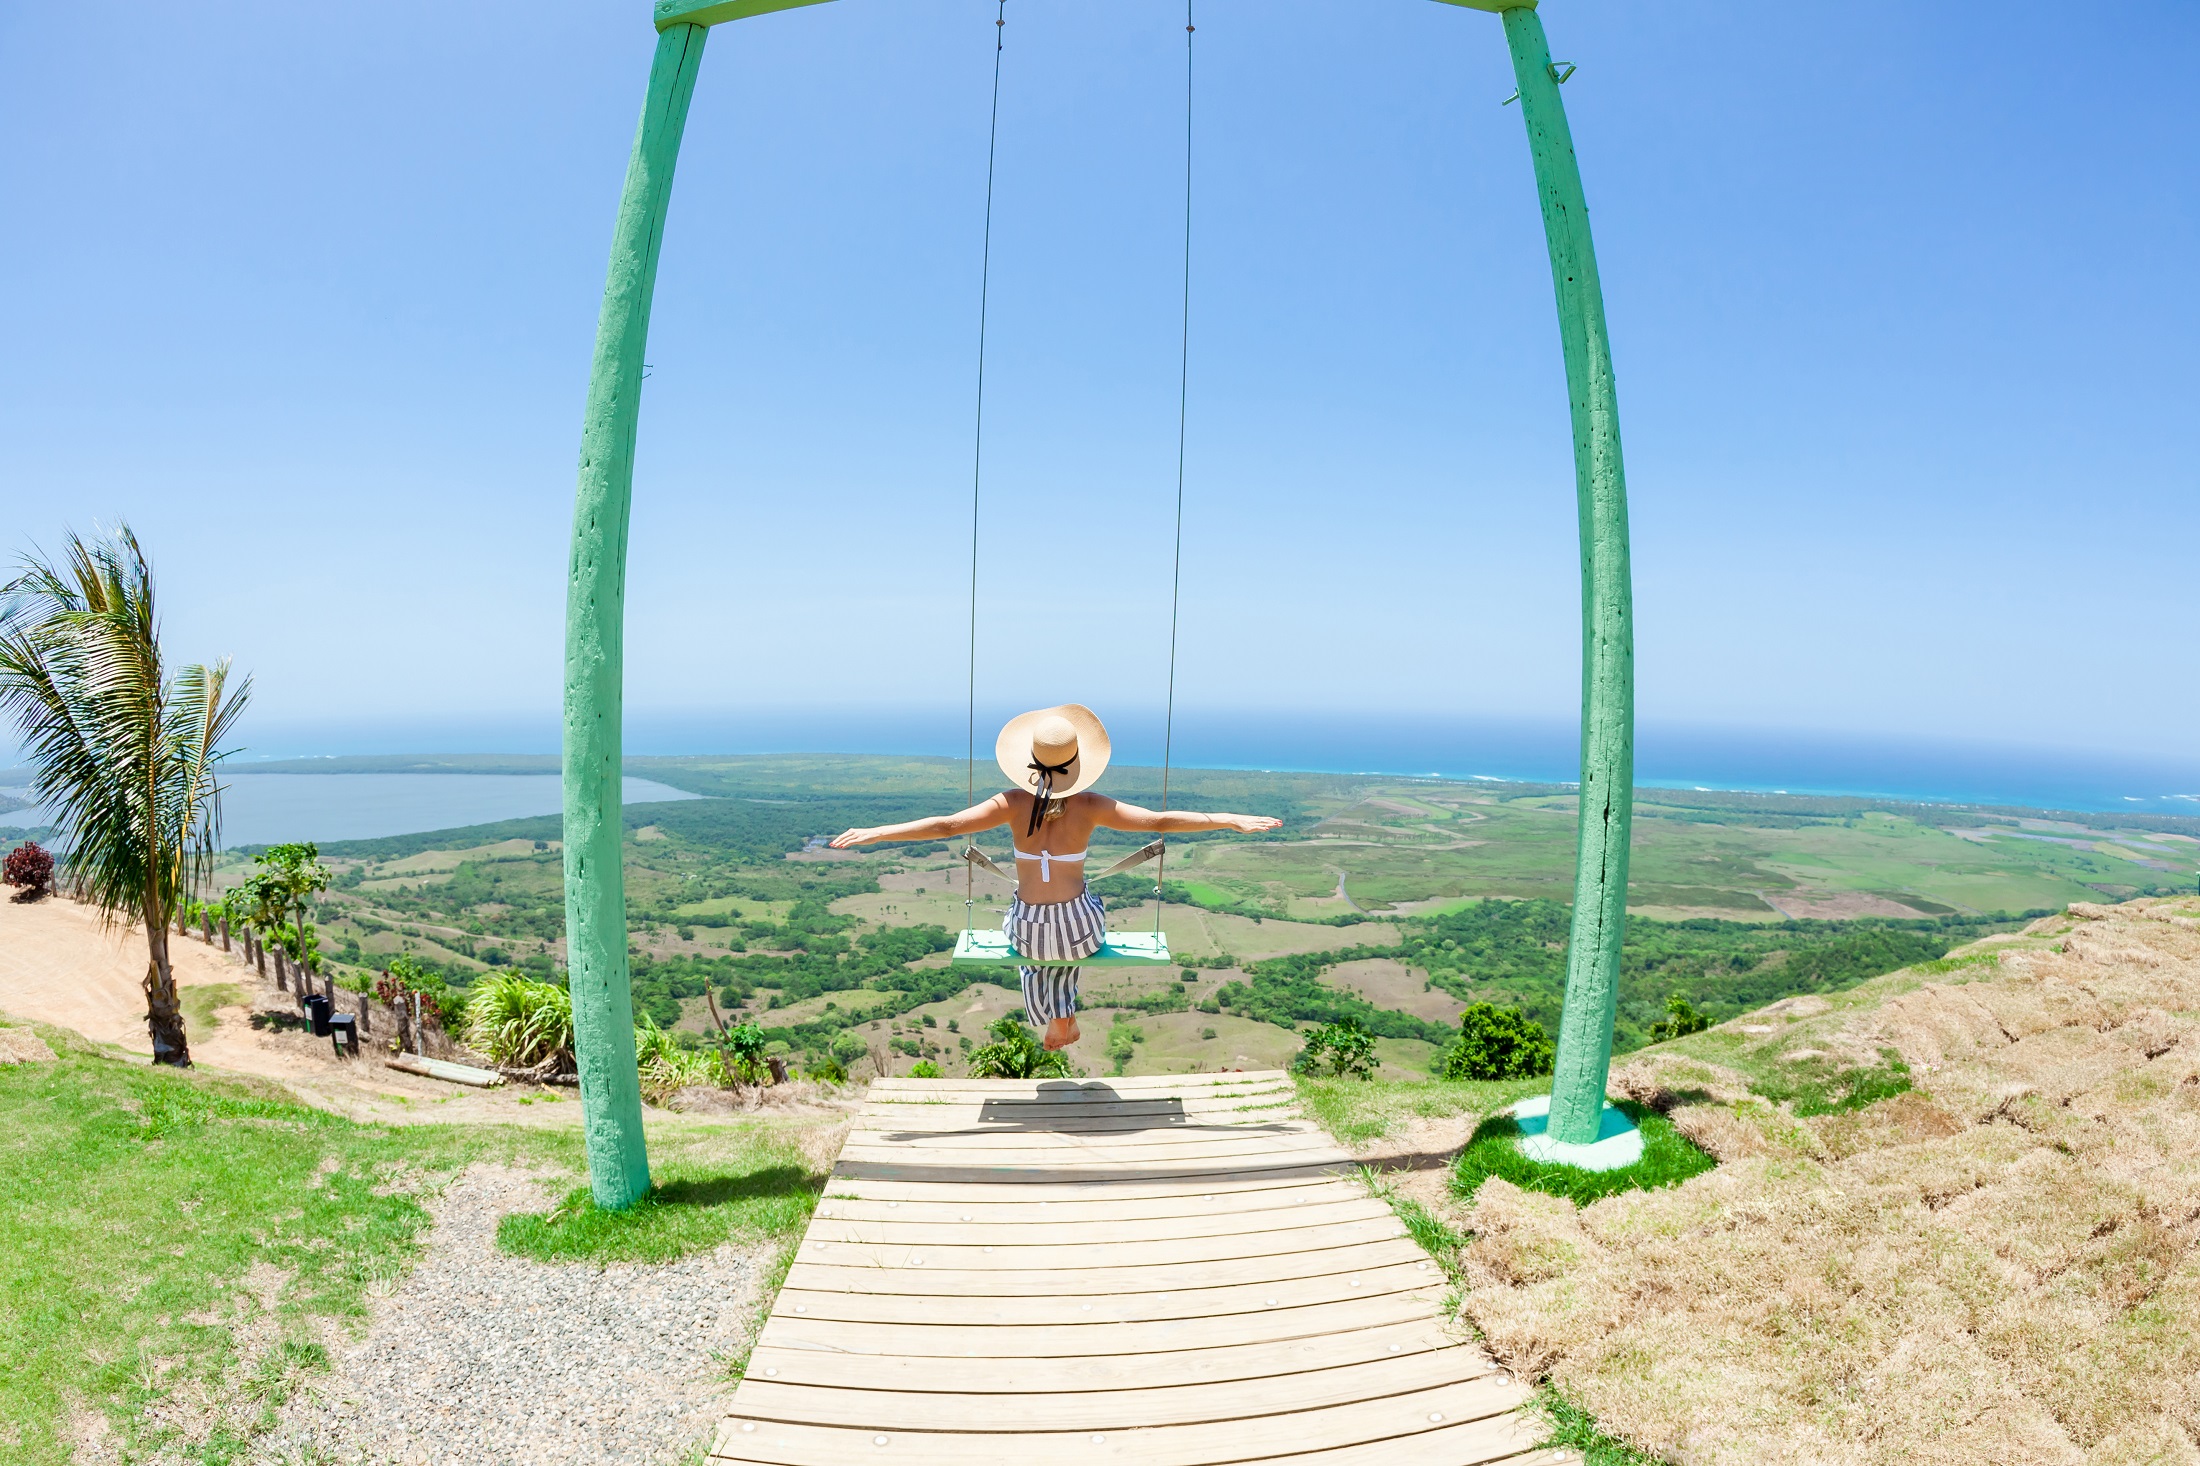 Woman swinging on swings over the green mountains with ocean sea caribbean tropical landscape and horizon line with blue sky. Montana Redonda, Dominican republic. Freedom concept. Touristic place